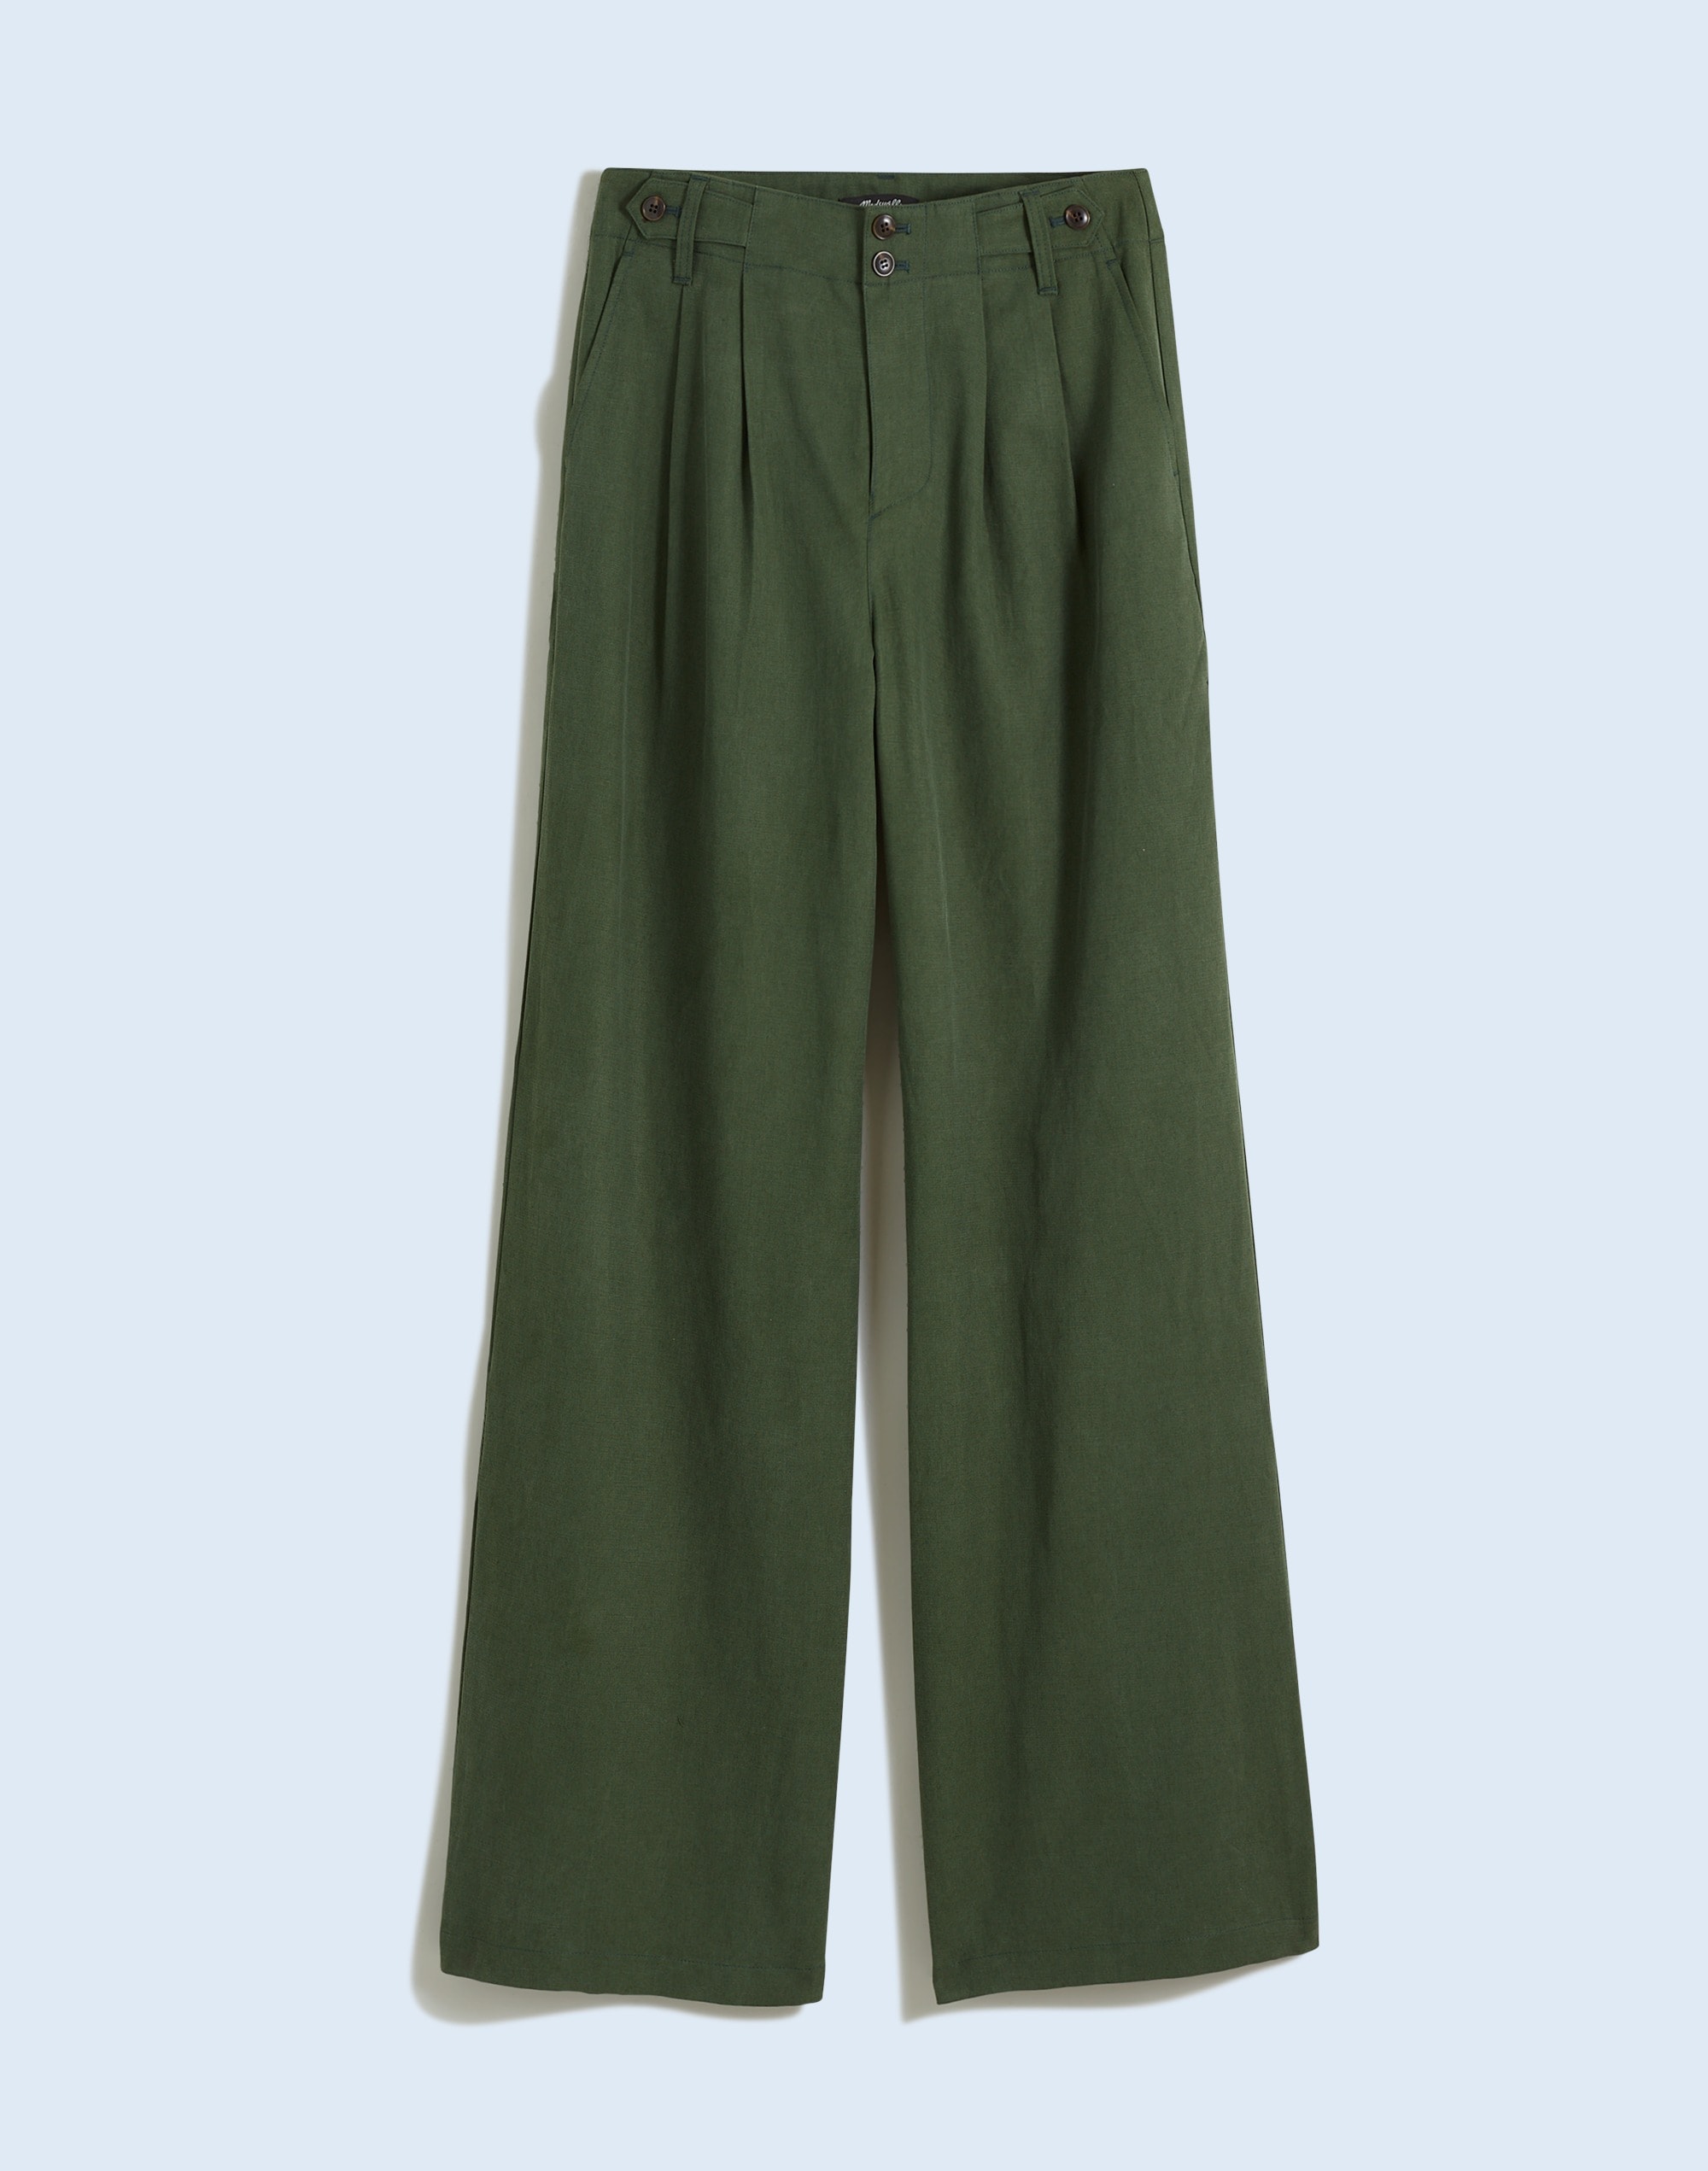 The Tall Curvy Harlow Wide-Leg Pant